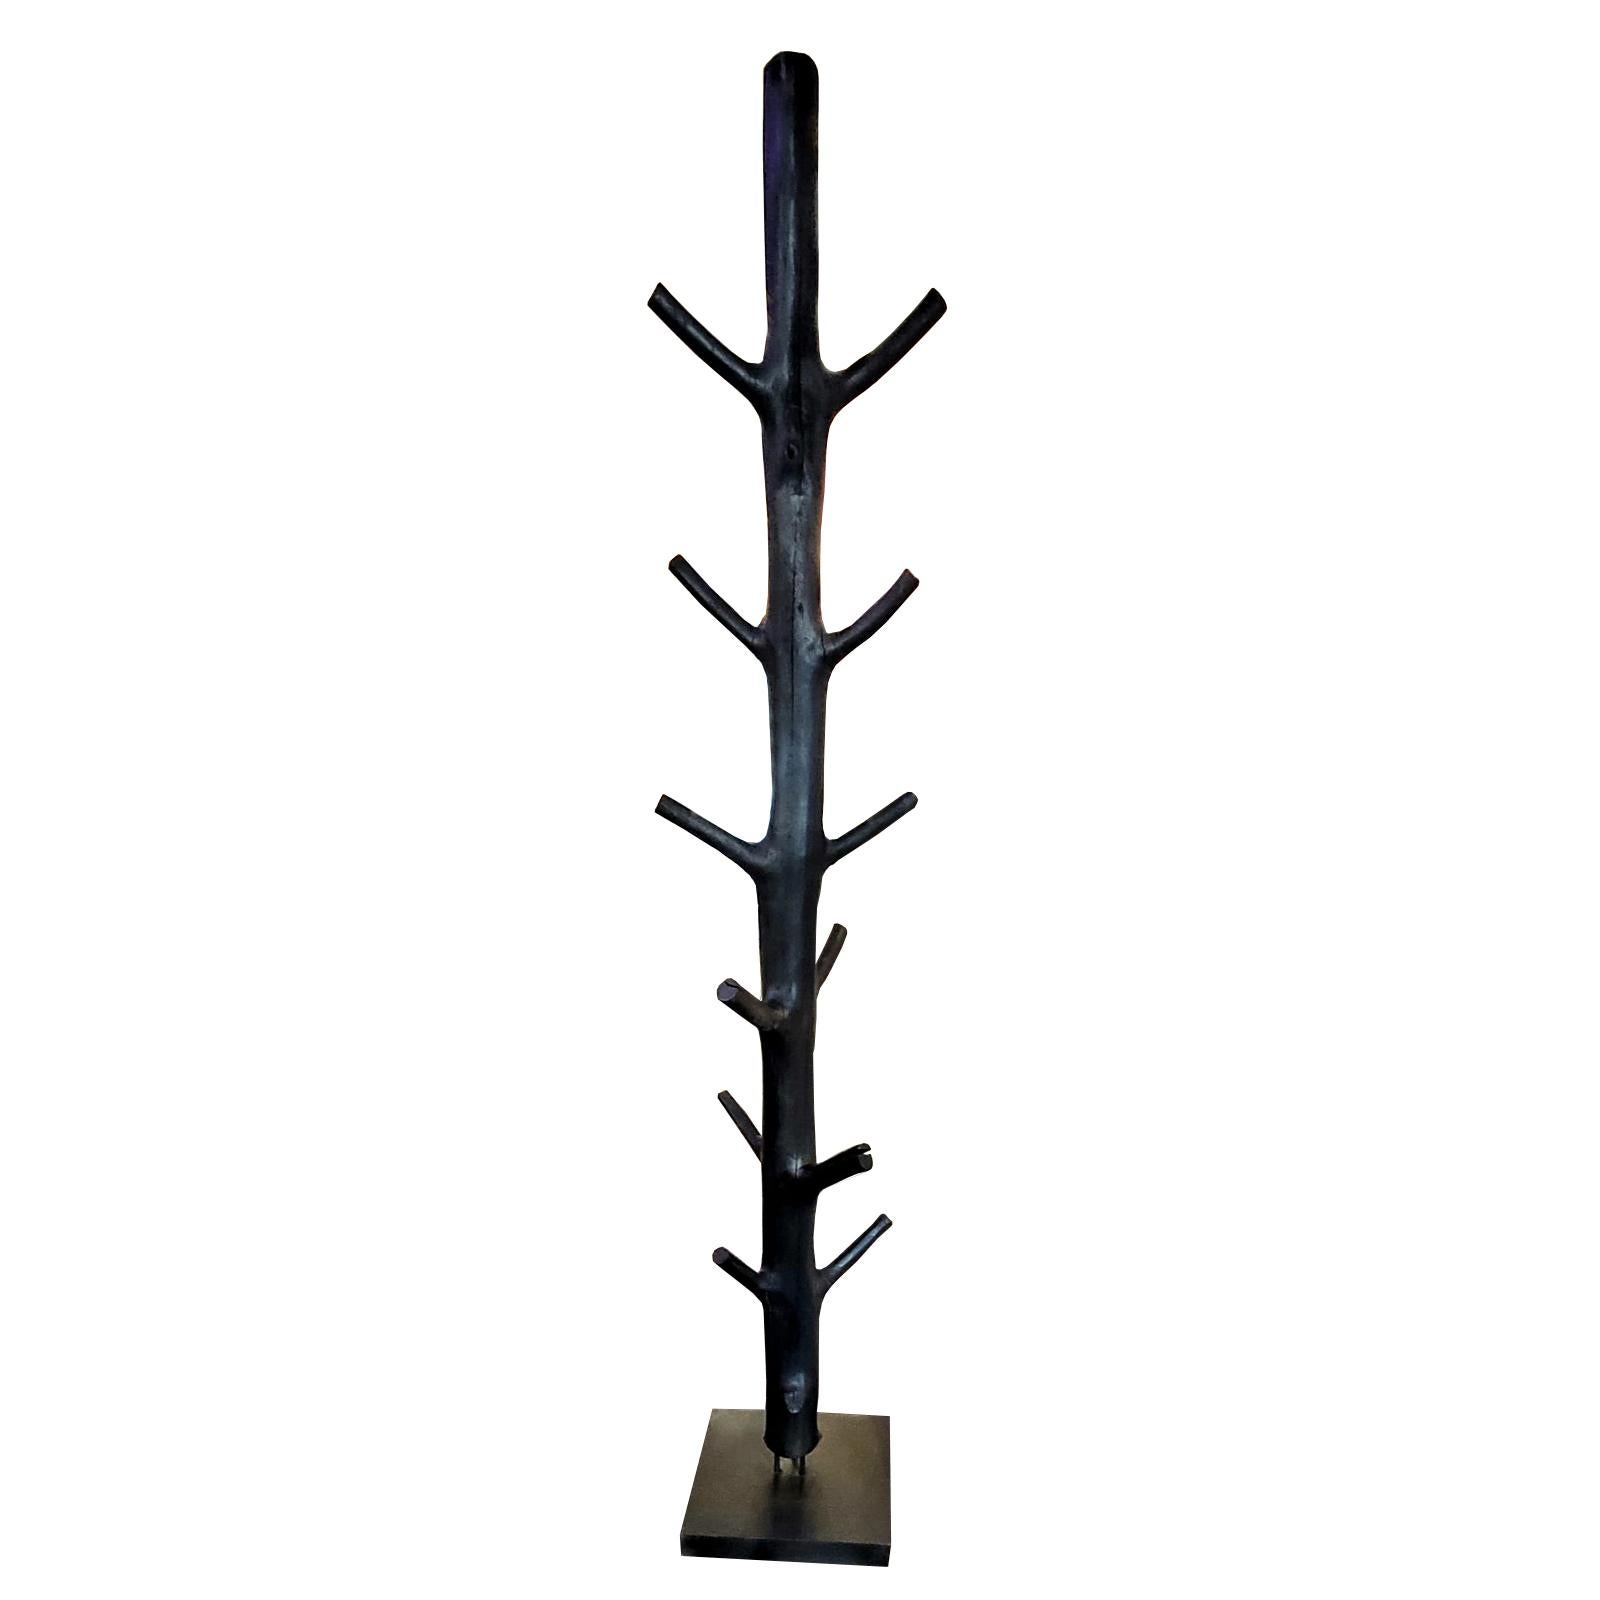 Coatrack blackened wooden tree made with polished natural wood
tree with black painting. On black iron base. Each piece is unique and 
may vary slightly.